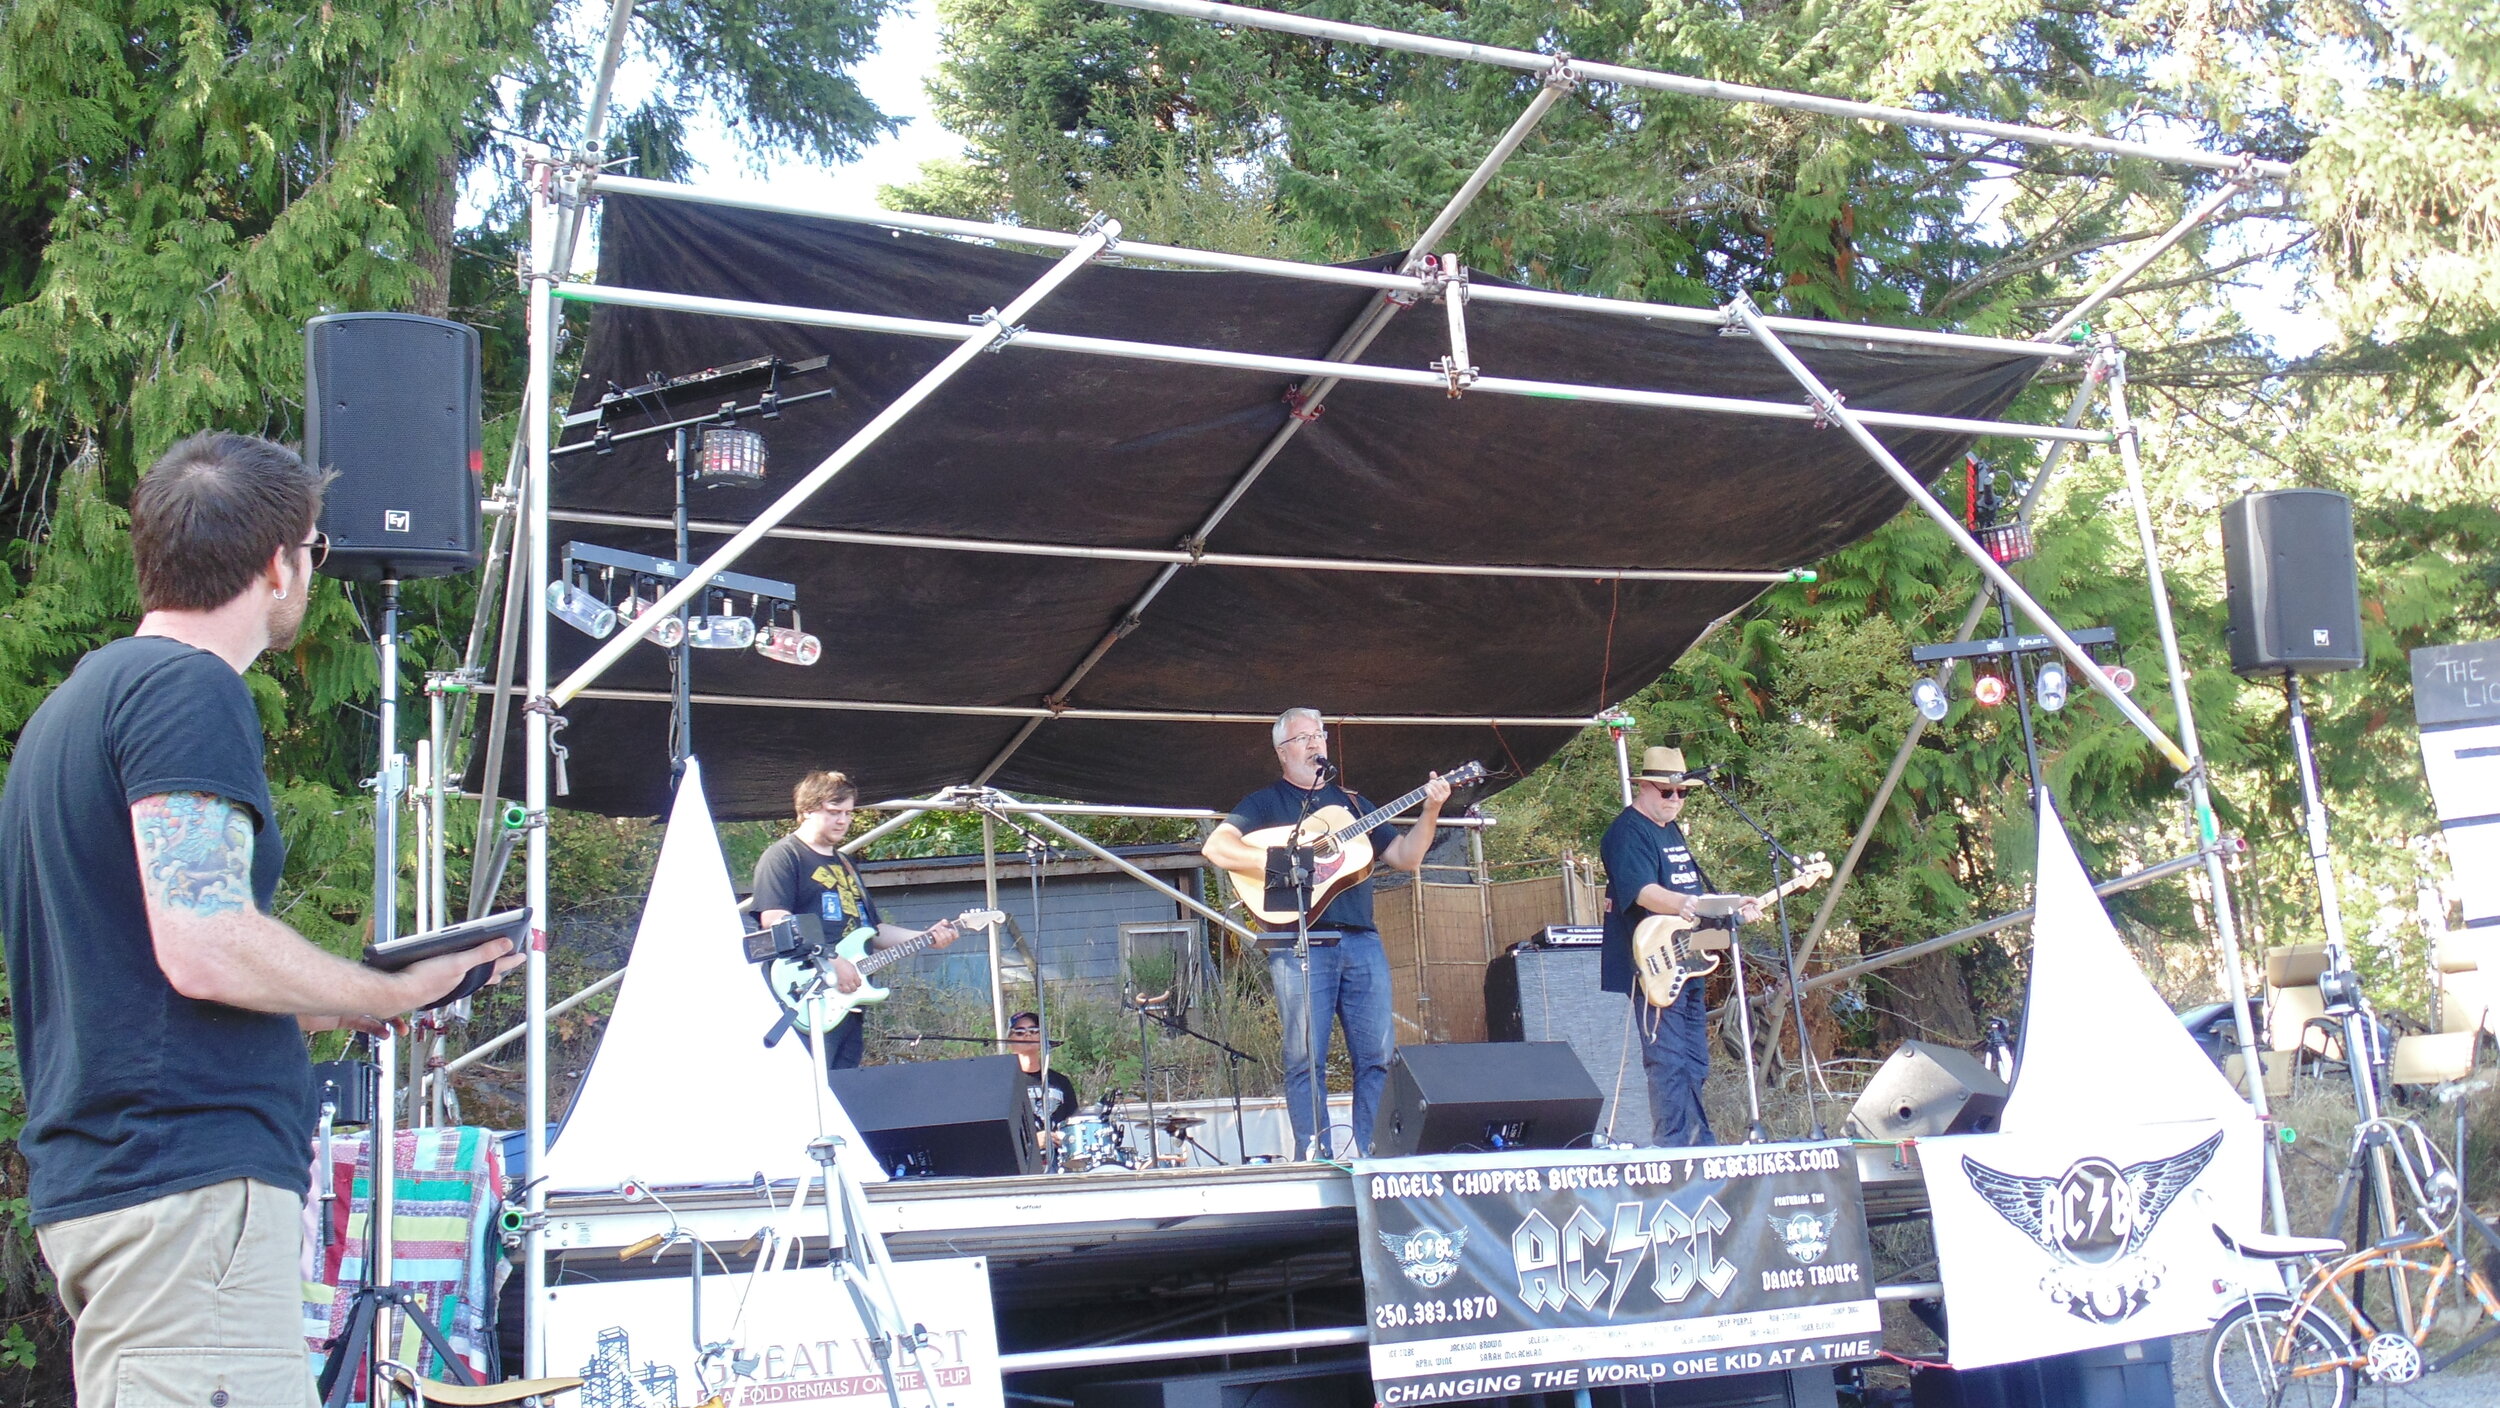 The Rollie Barrett Band performing at the Angels Chopper Bicycle Club non-profit "Rock 'N' The Bike fest" 2015